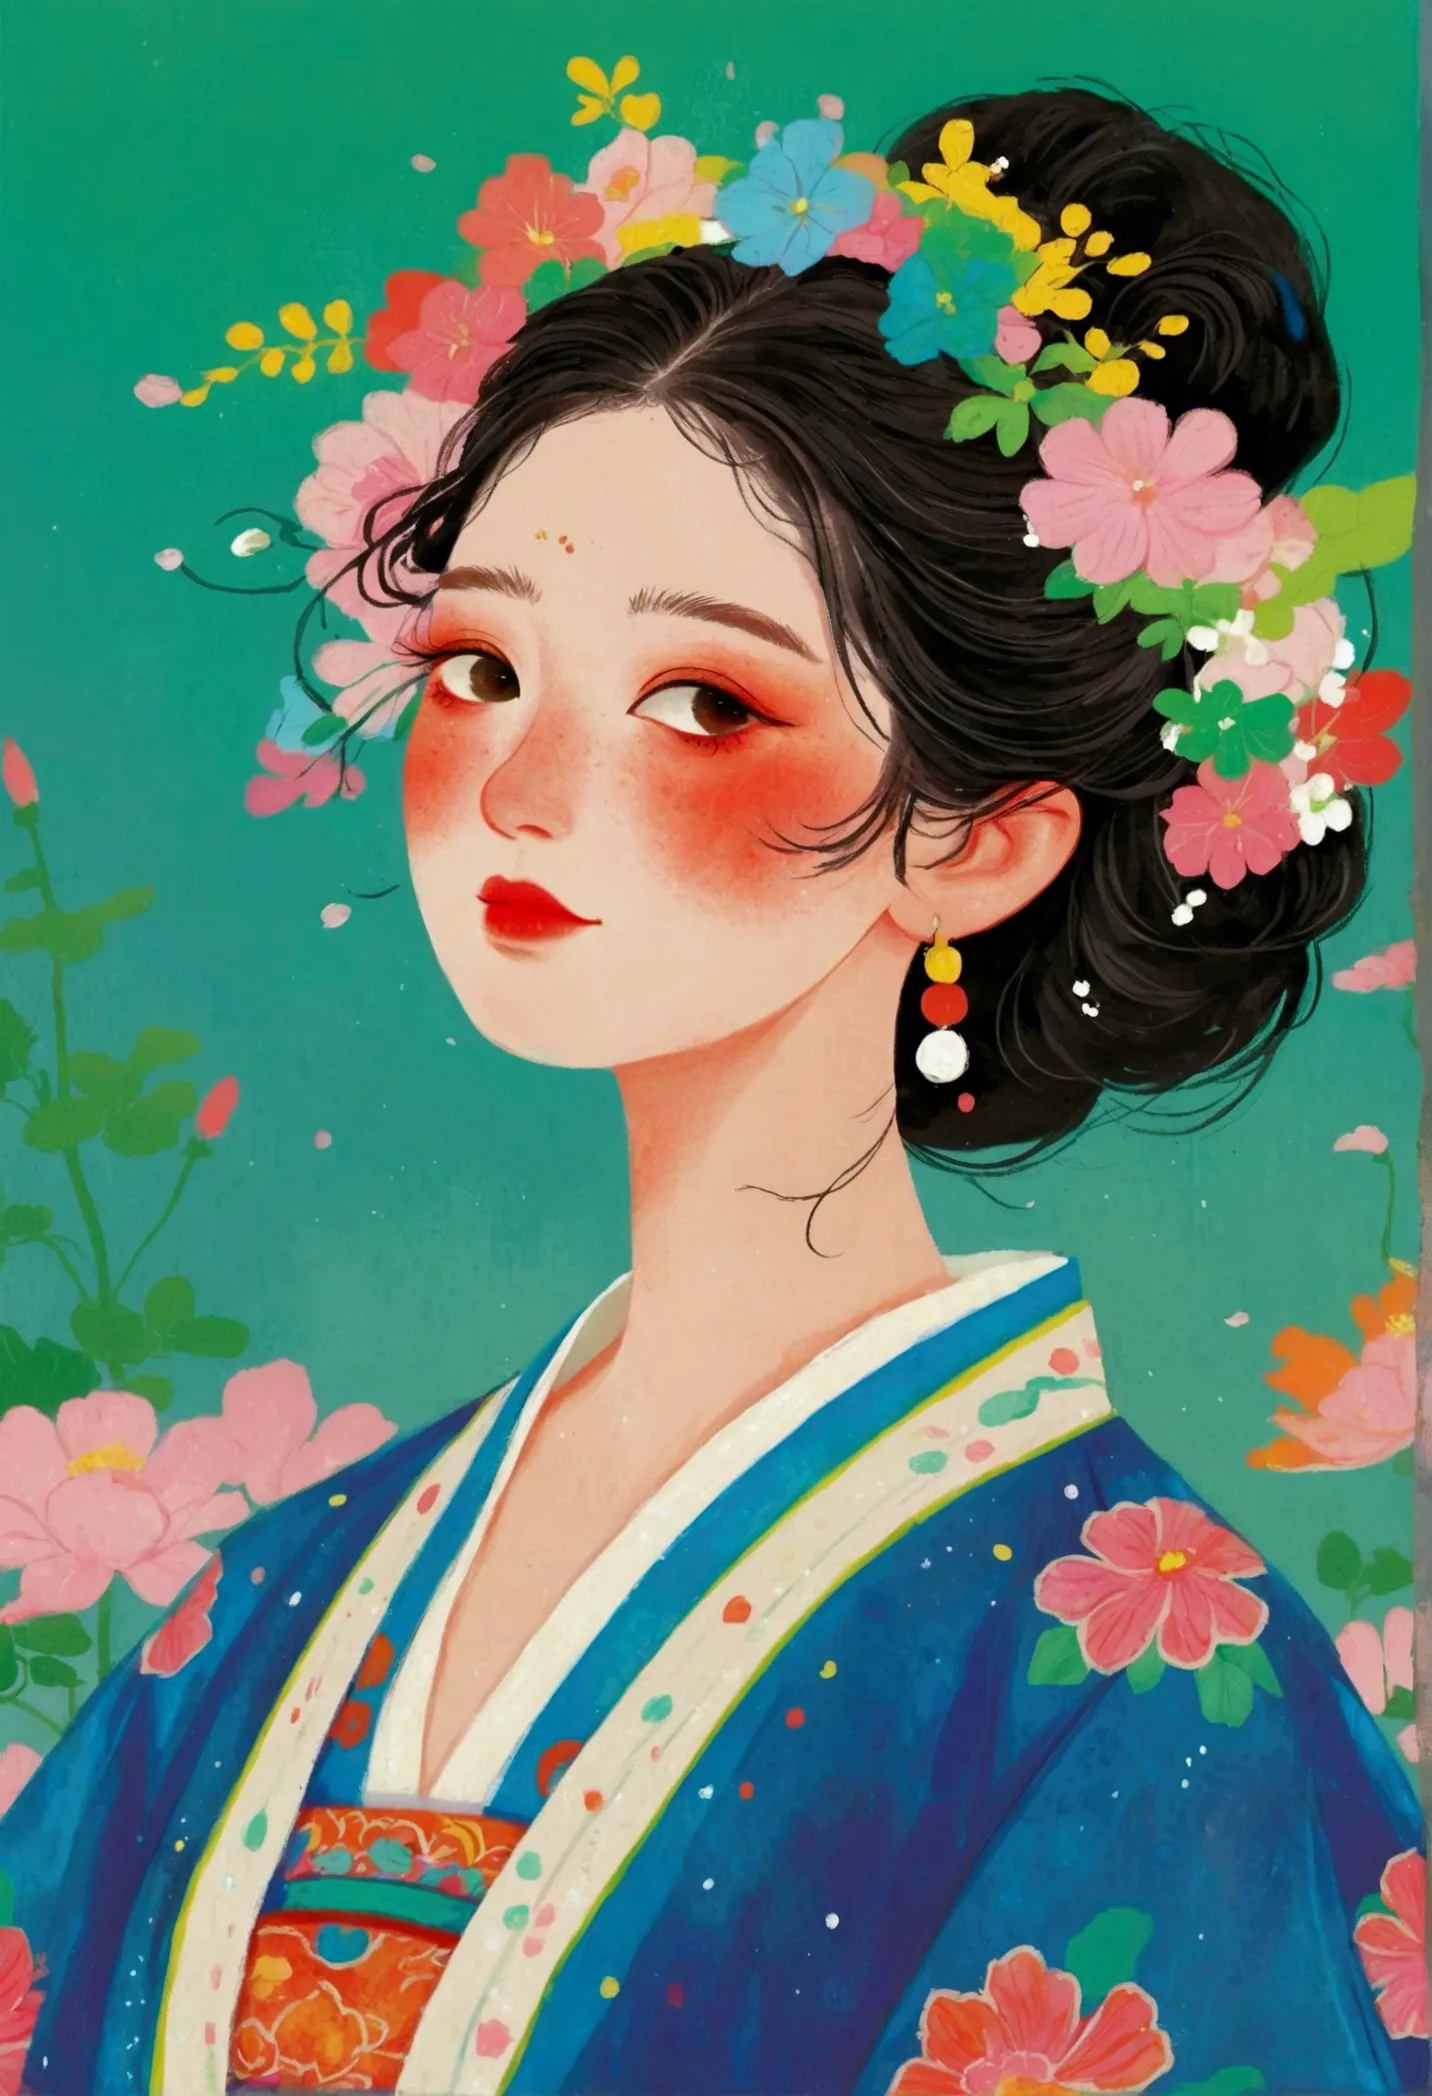 A painting of a woman wearing a flower crown, Digital paintings by Mei Qing, cg Social Hotspot, Cloisonnism, Beautiful character...